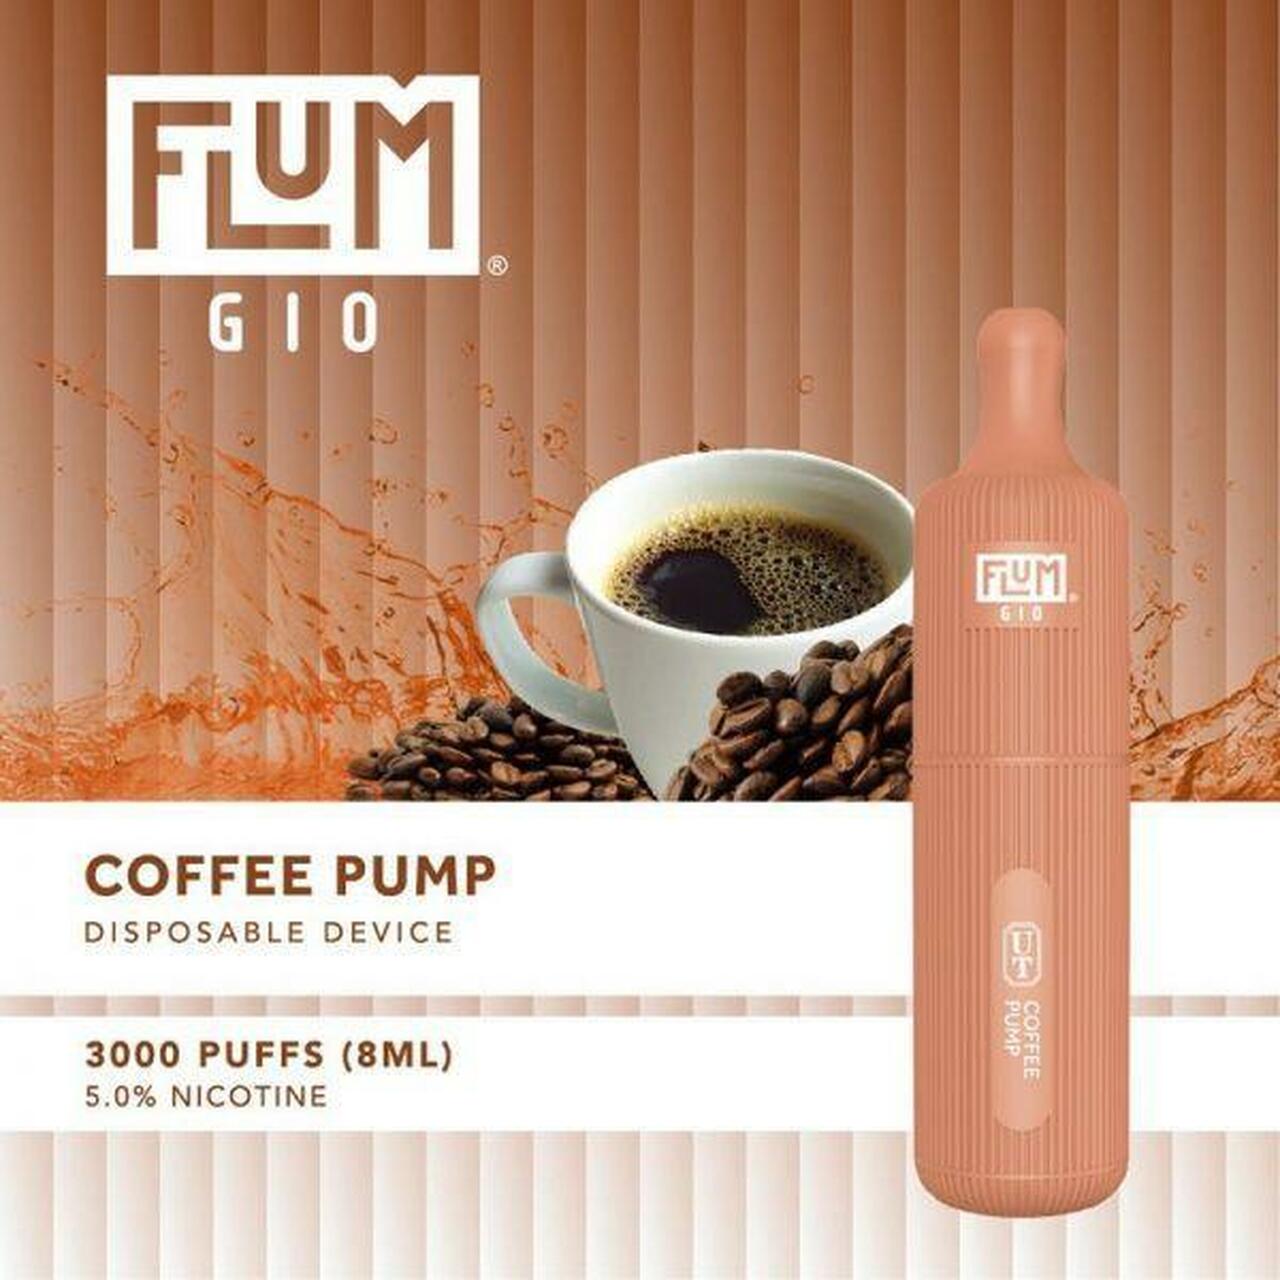 Flum GIO Disposable Kit Cost